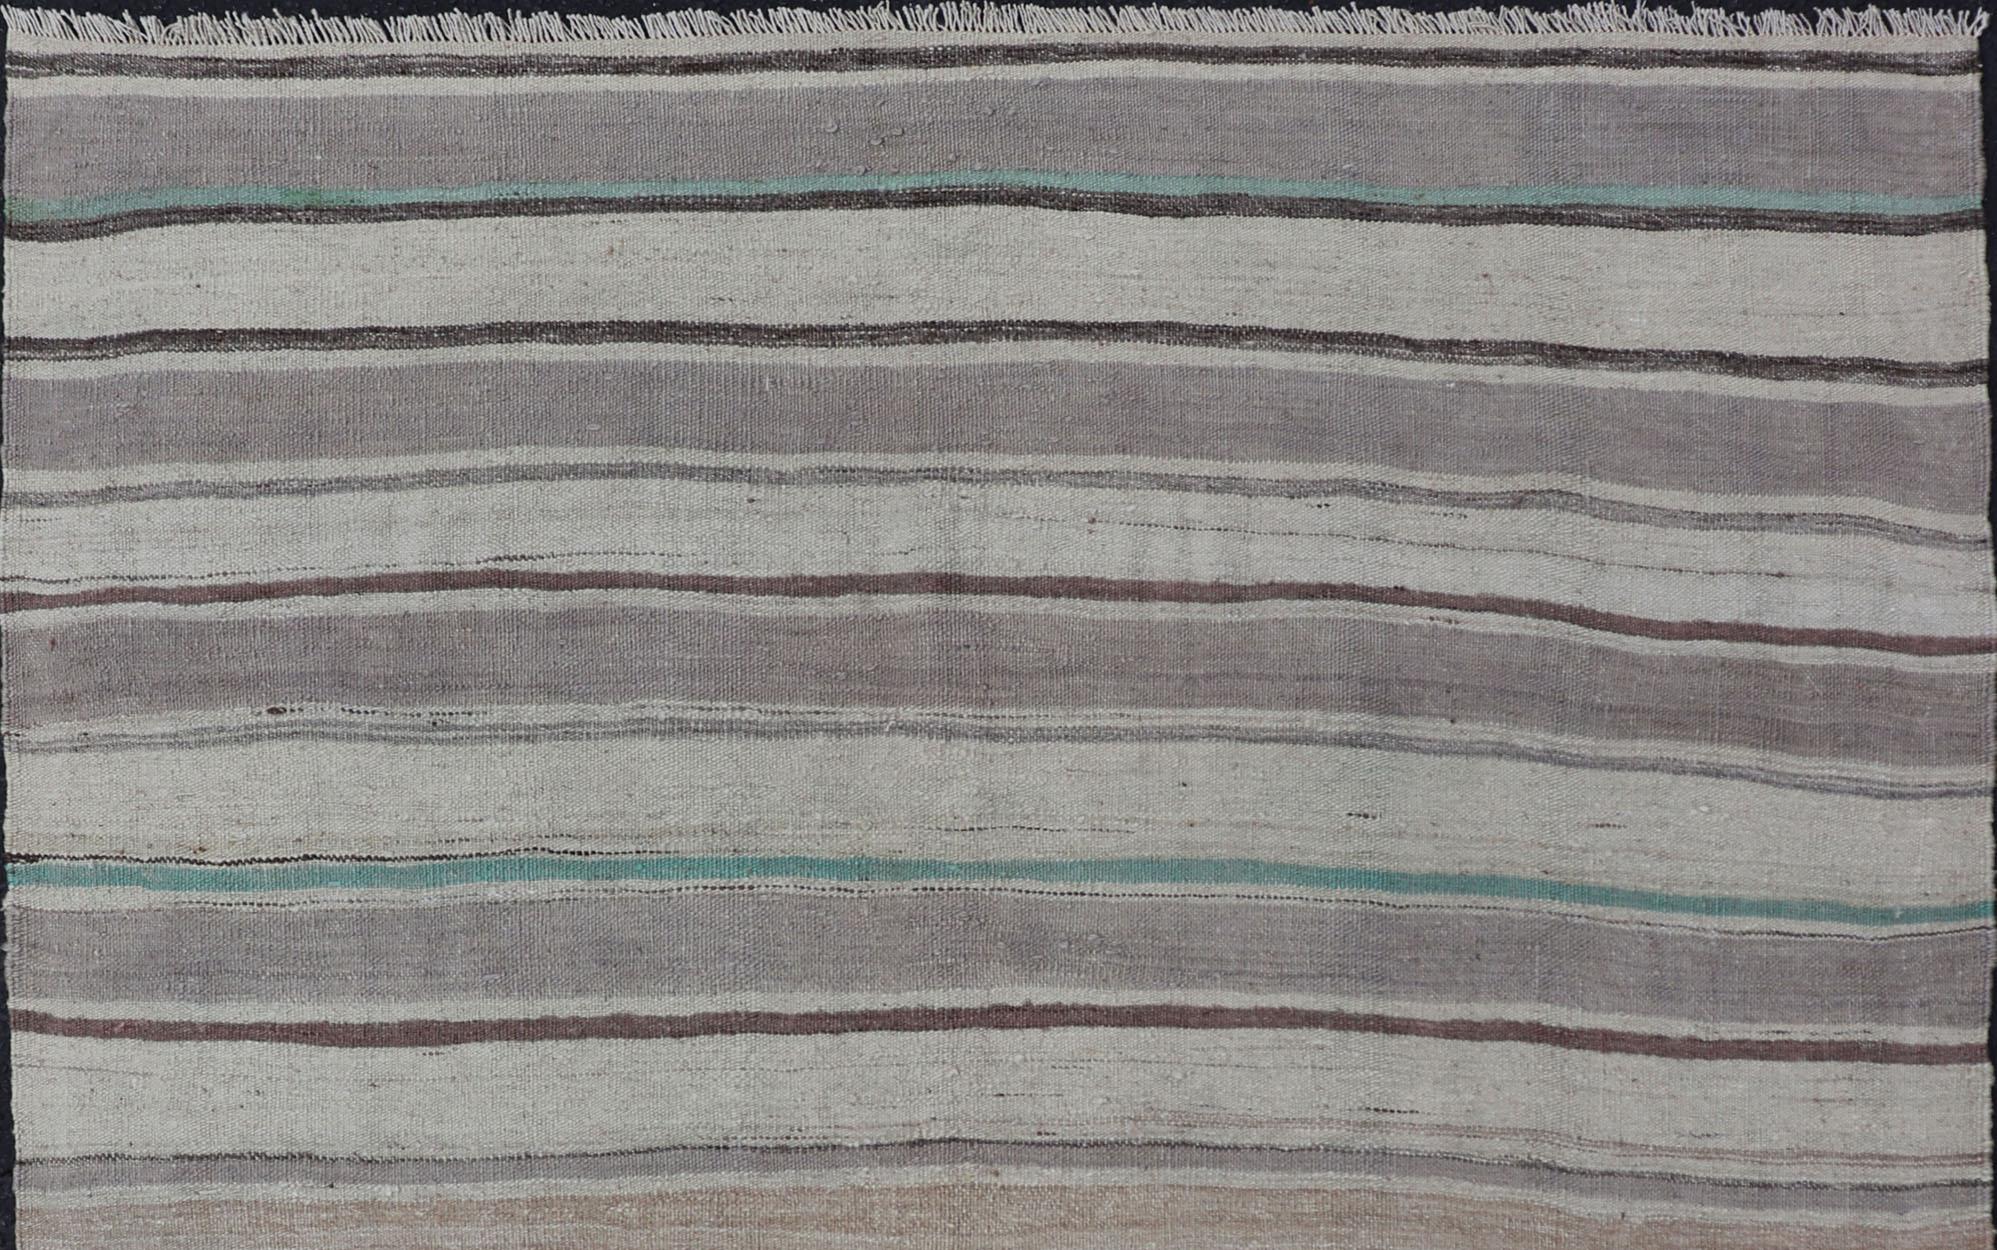 Turkish vintage Kilim flat-weave small rug in brown, lavender, and cream with stripe design, with Minimalist design and stripes. Keivan Woven Arts / rug EN-178769, country of origin / type: Turkey / Kilim, circa 1950
Measures:4'7 x 5'0 

This